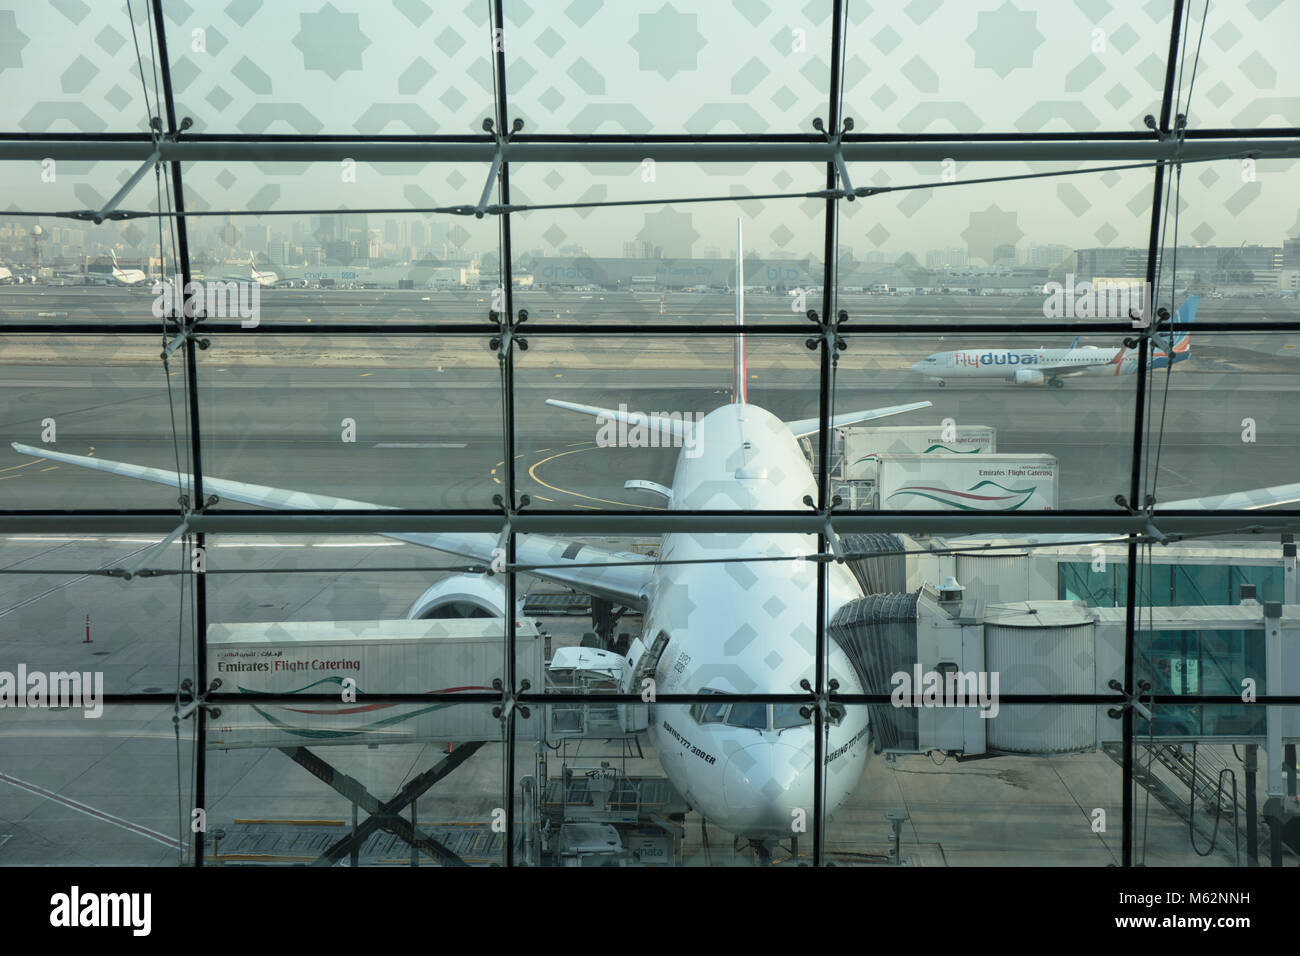 An airplane waiting for take off parked in the Dubai International airport, United Arab Emirates. Stock Photo